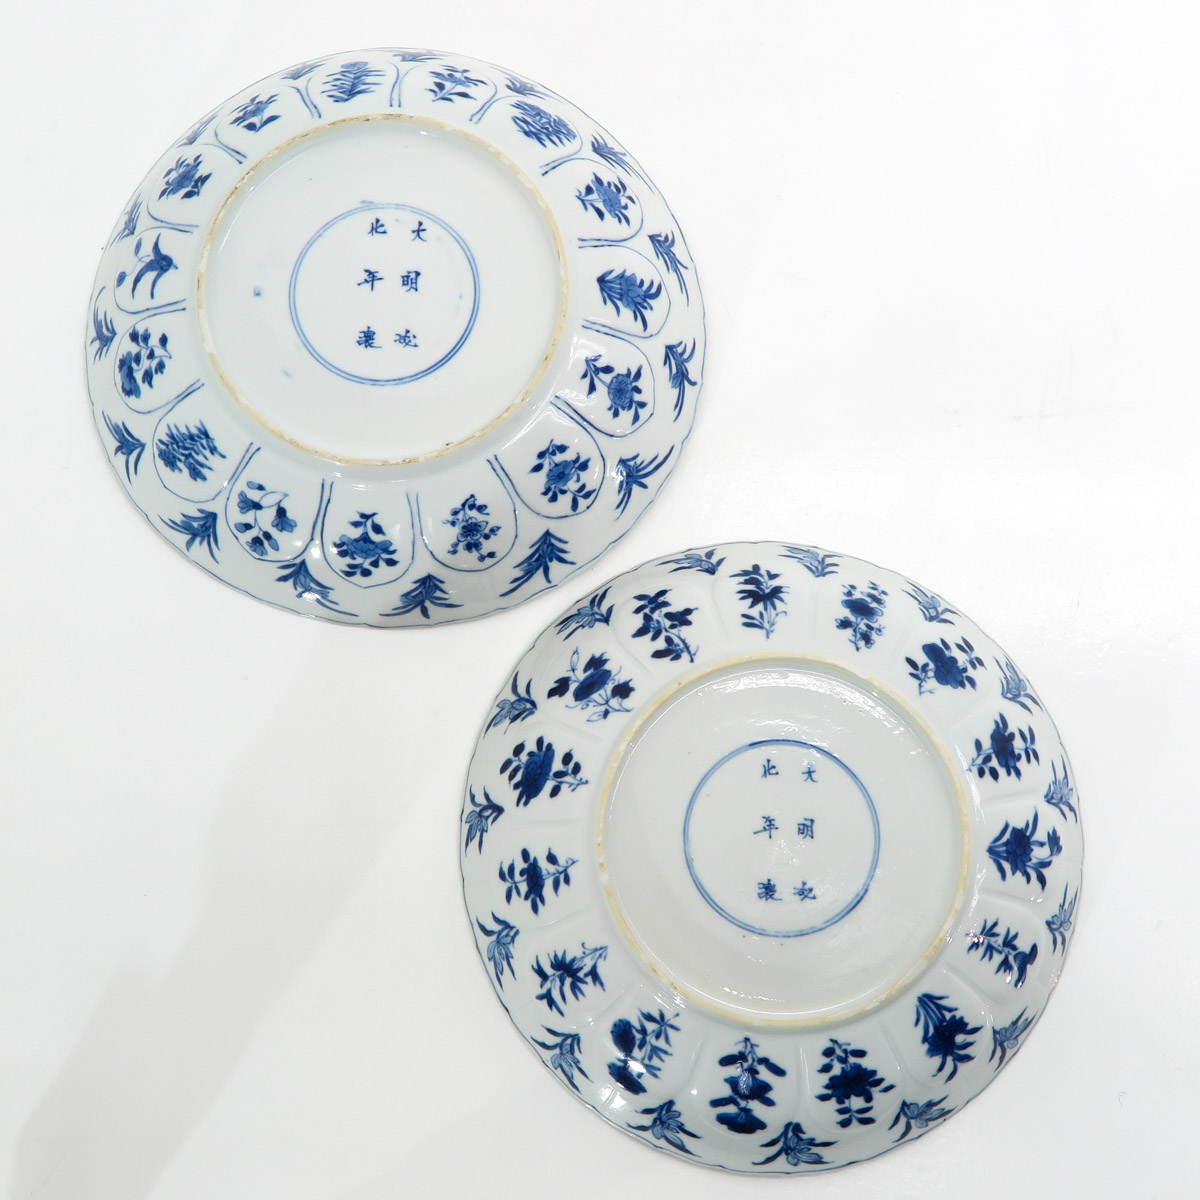 A Pair of Blue and White Decor Plates - Image 2 of 3